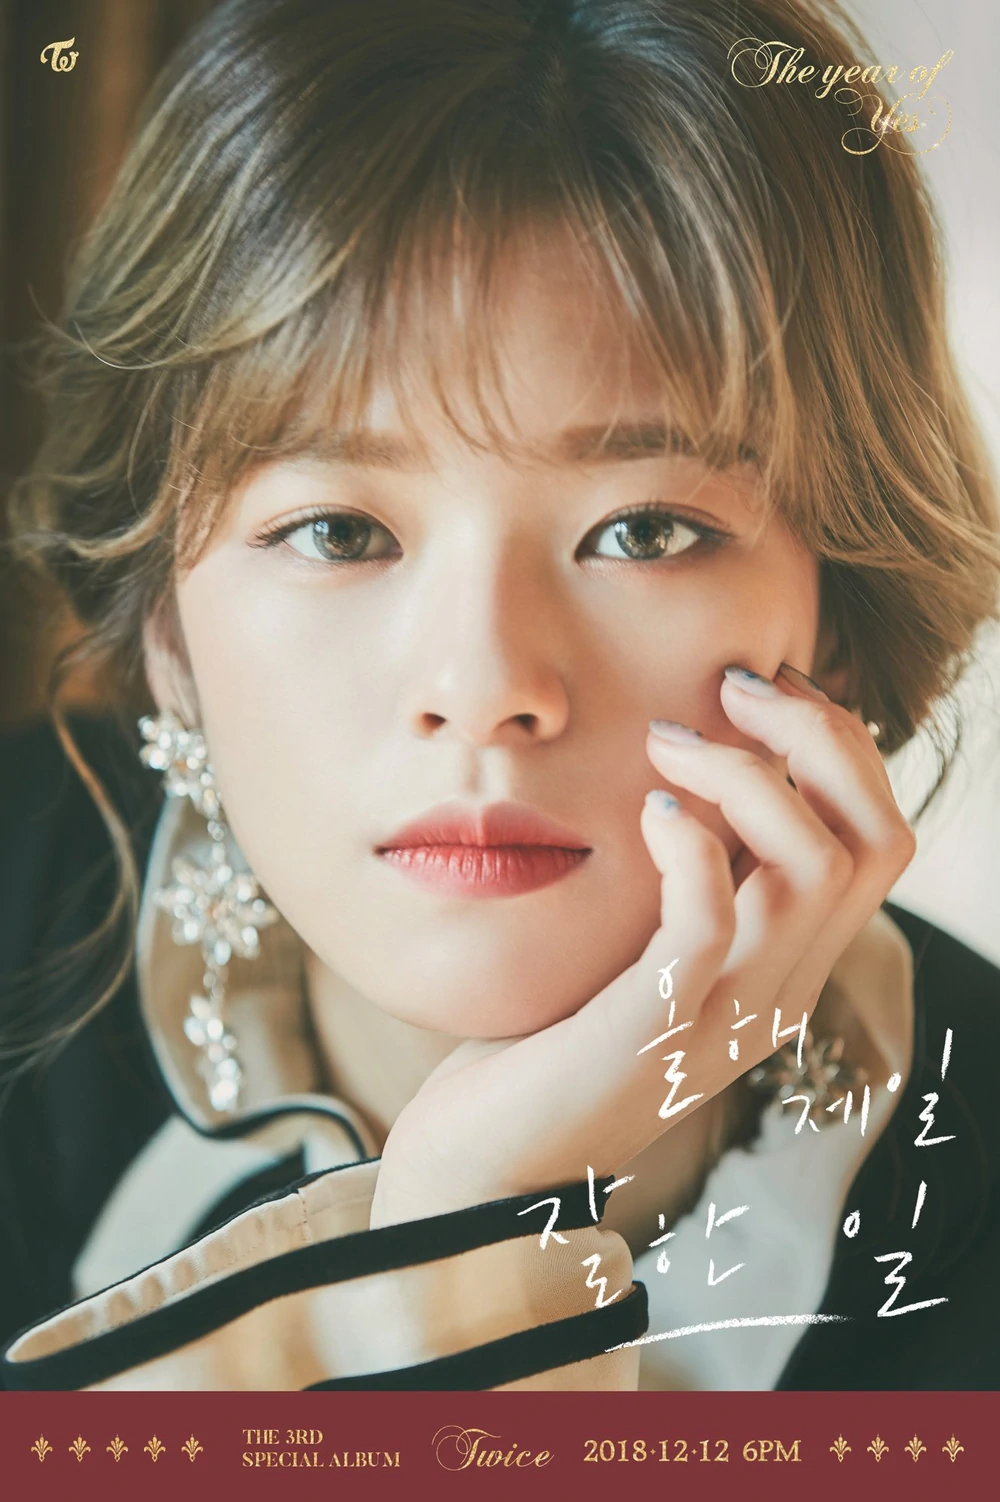 Twice Year Of Yes Jeongyeon Concept Teaser Picture Image Photo Kpop K-Concept 1